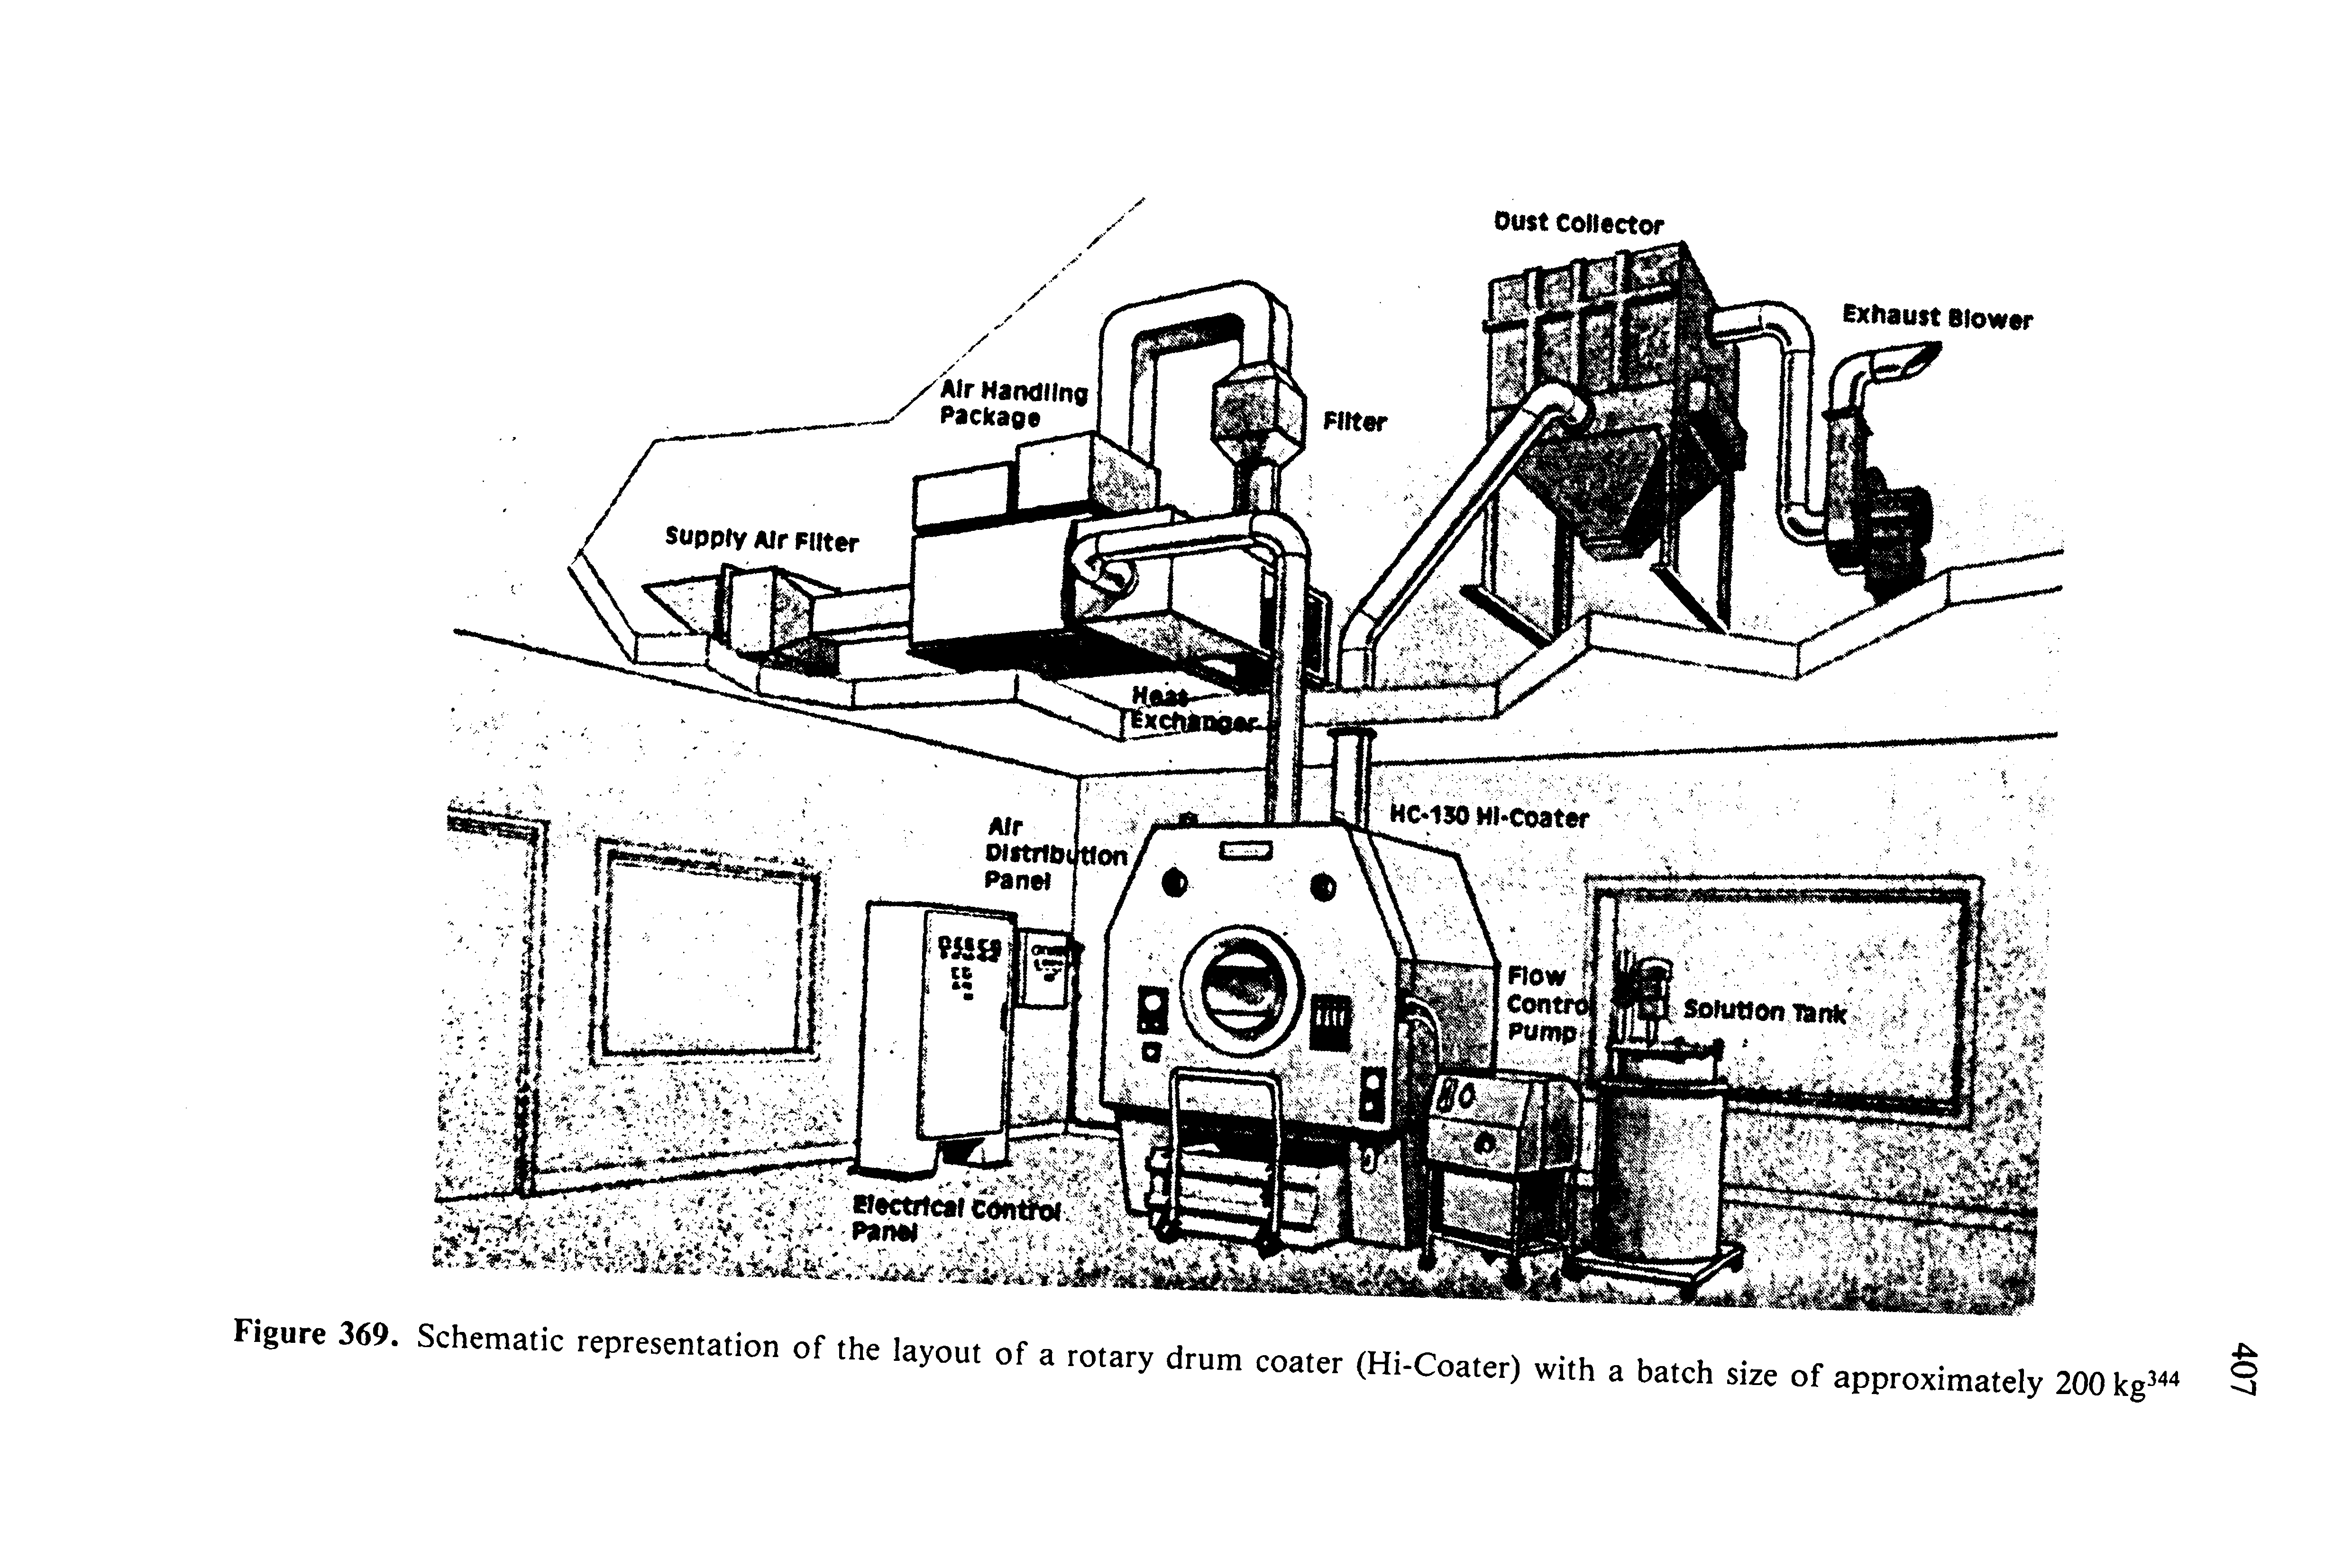 Figure 369. Schematic representation of the layout of a rotary drum coater (Hi-Coater) with a batch size of approximately 200 kg ...